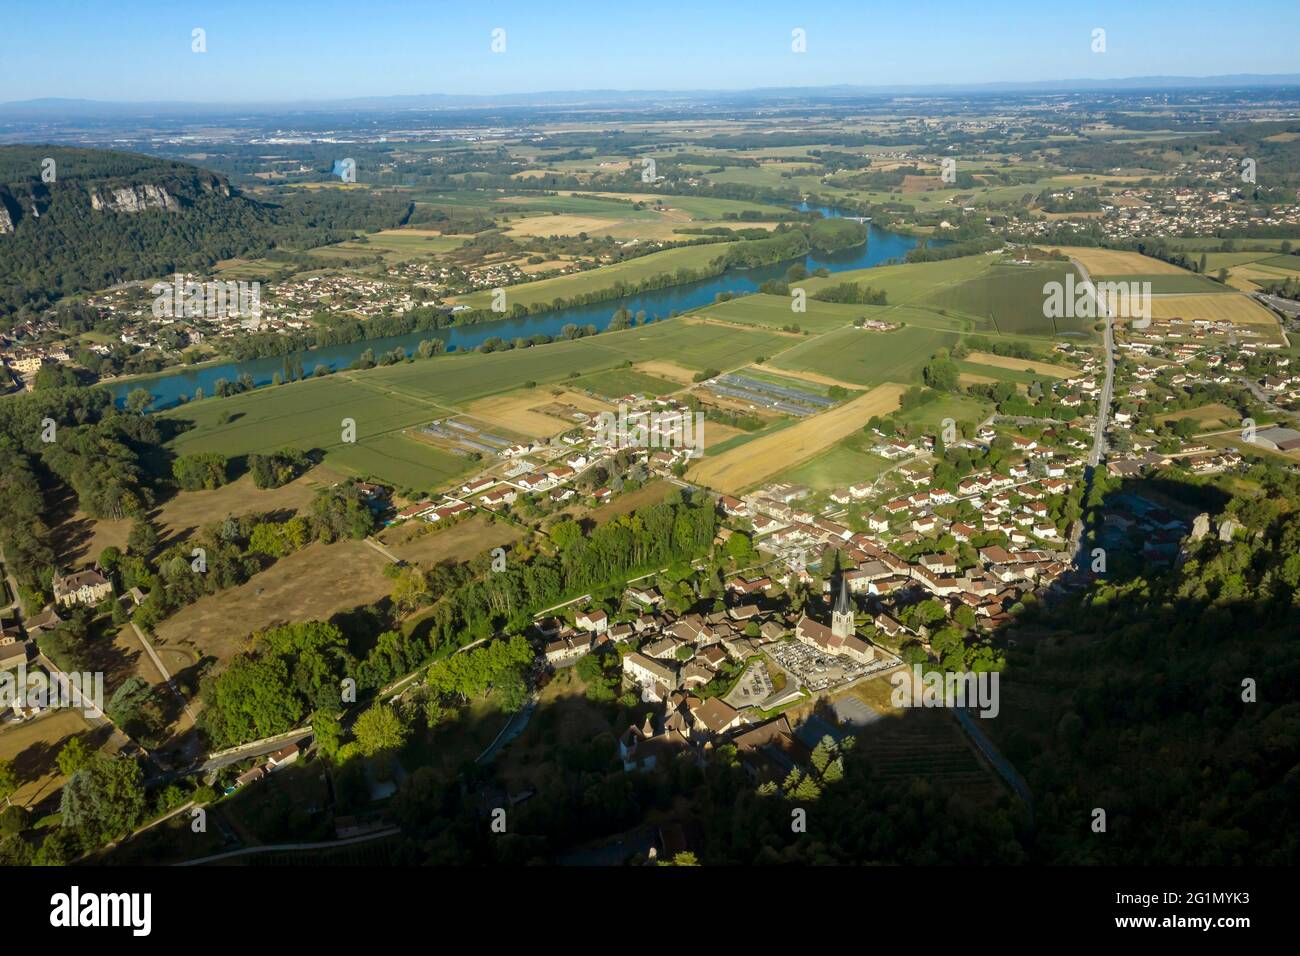 France, Ain, the Rhone valley from the village of Saint-Sorlin-en-Bugey (aerial view) Stock Photo